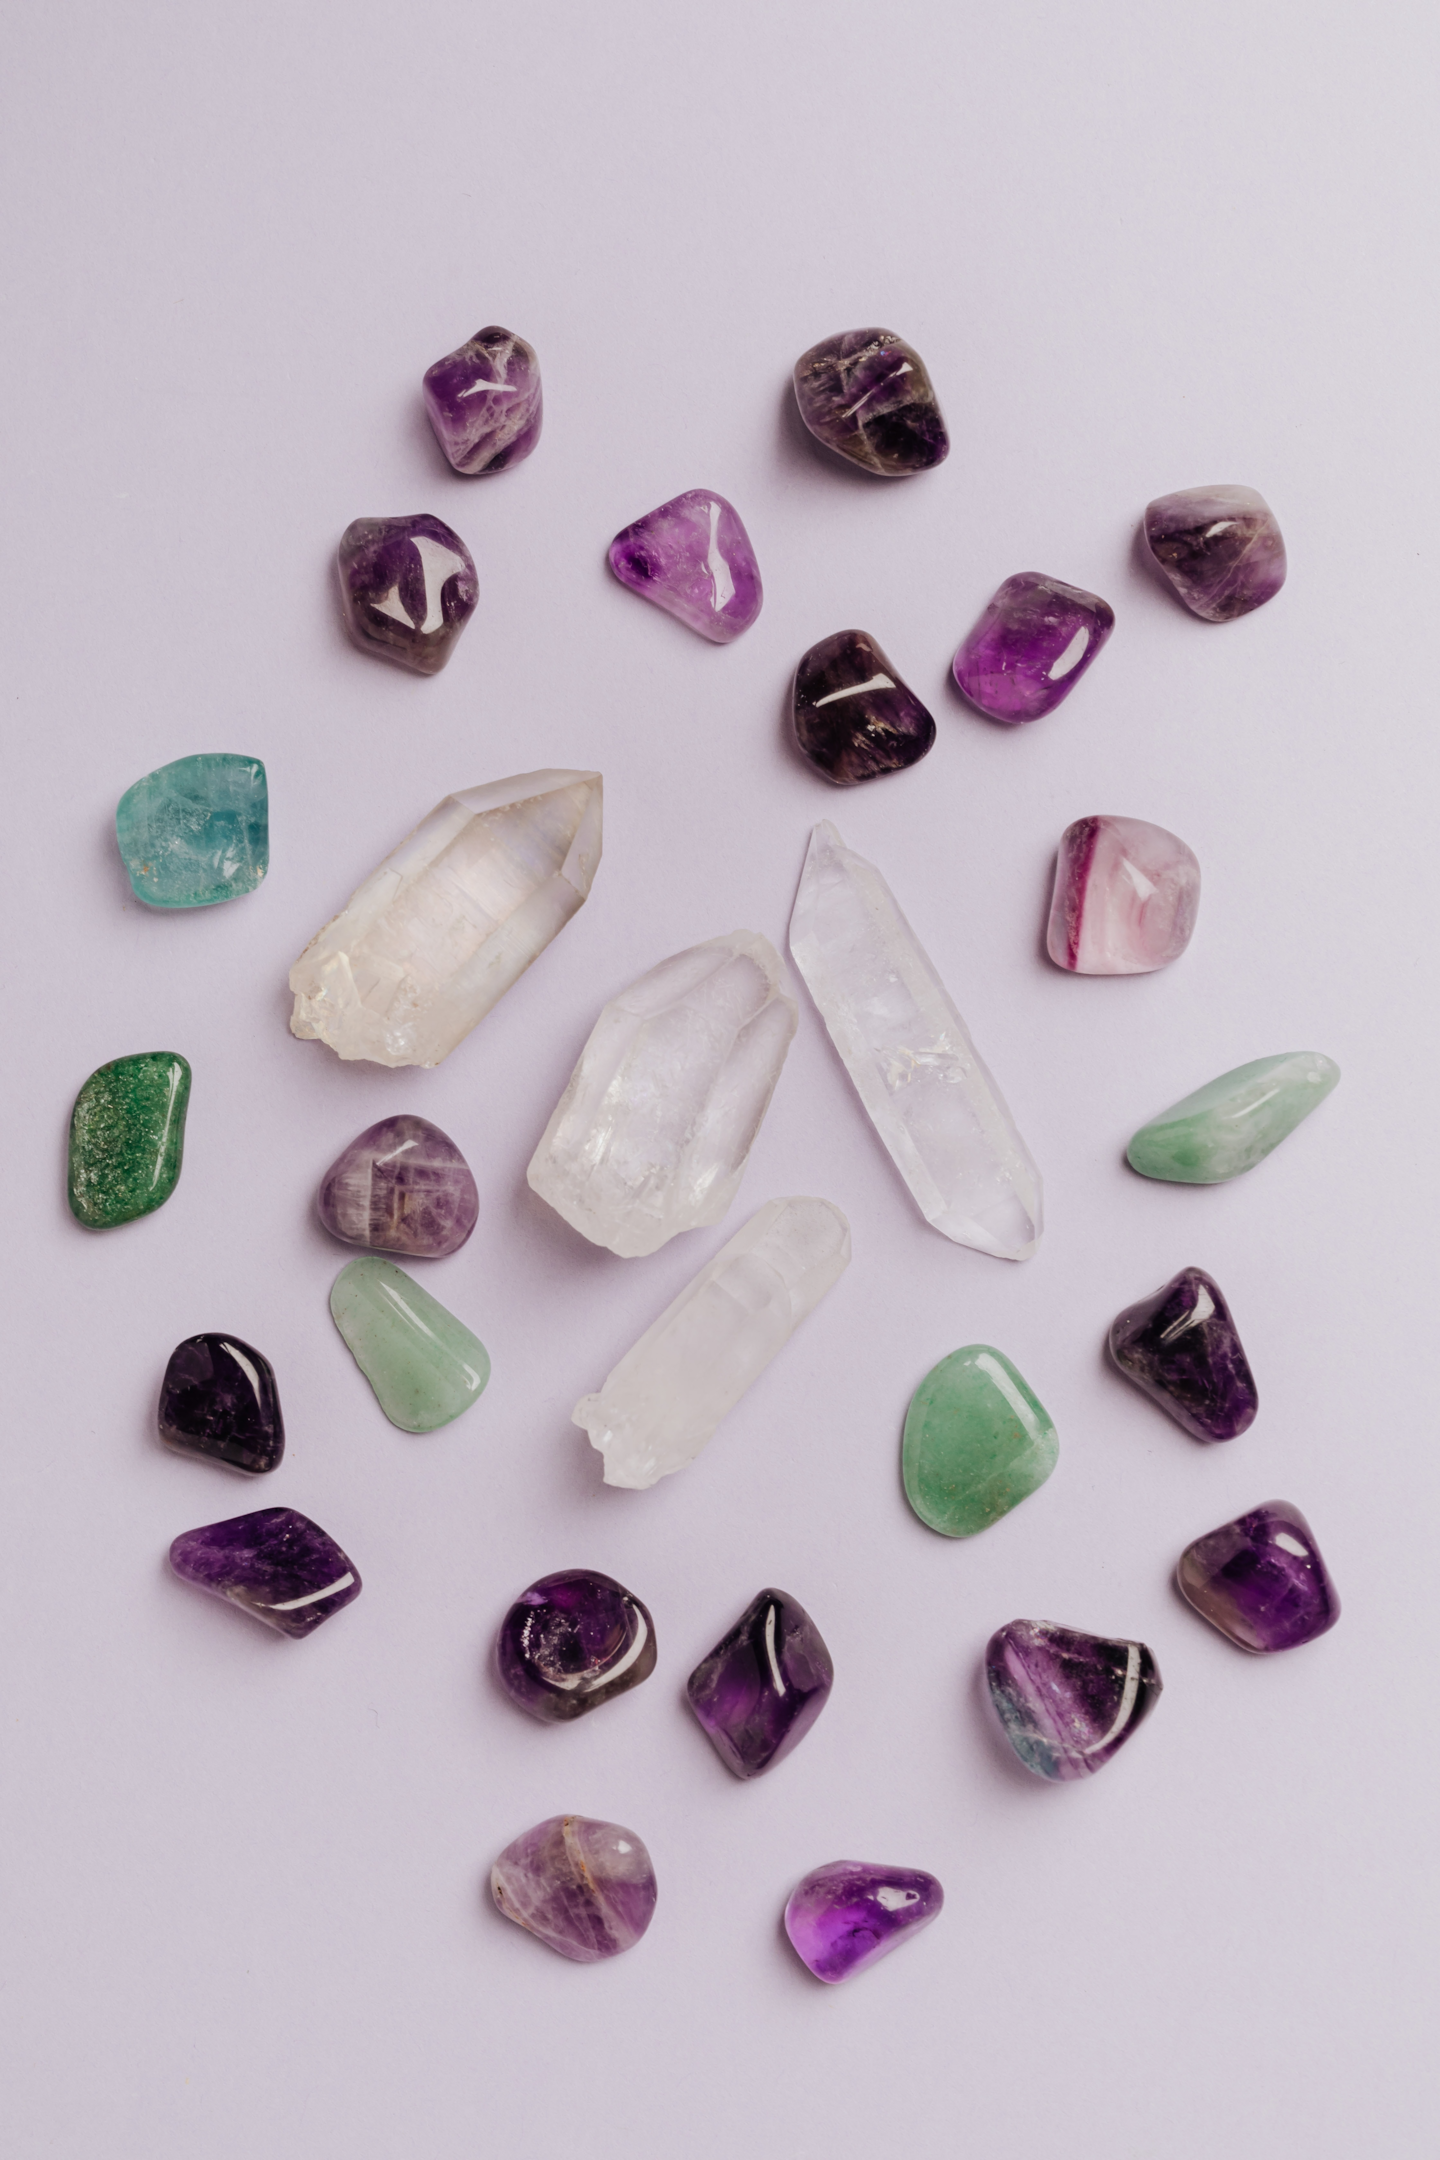 Small collection of crystals and stones including Selenite & Amethyst. Naan Design.  Naandesign.